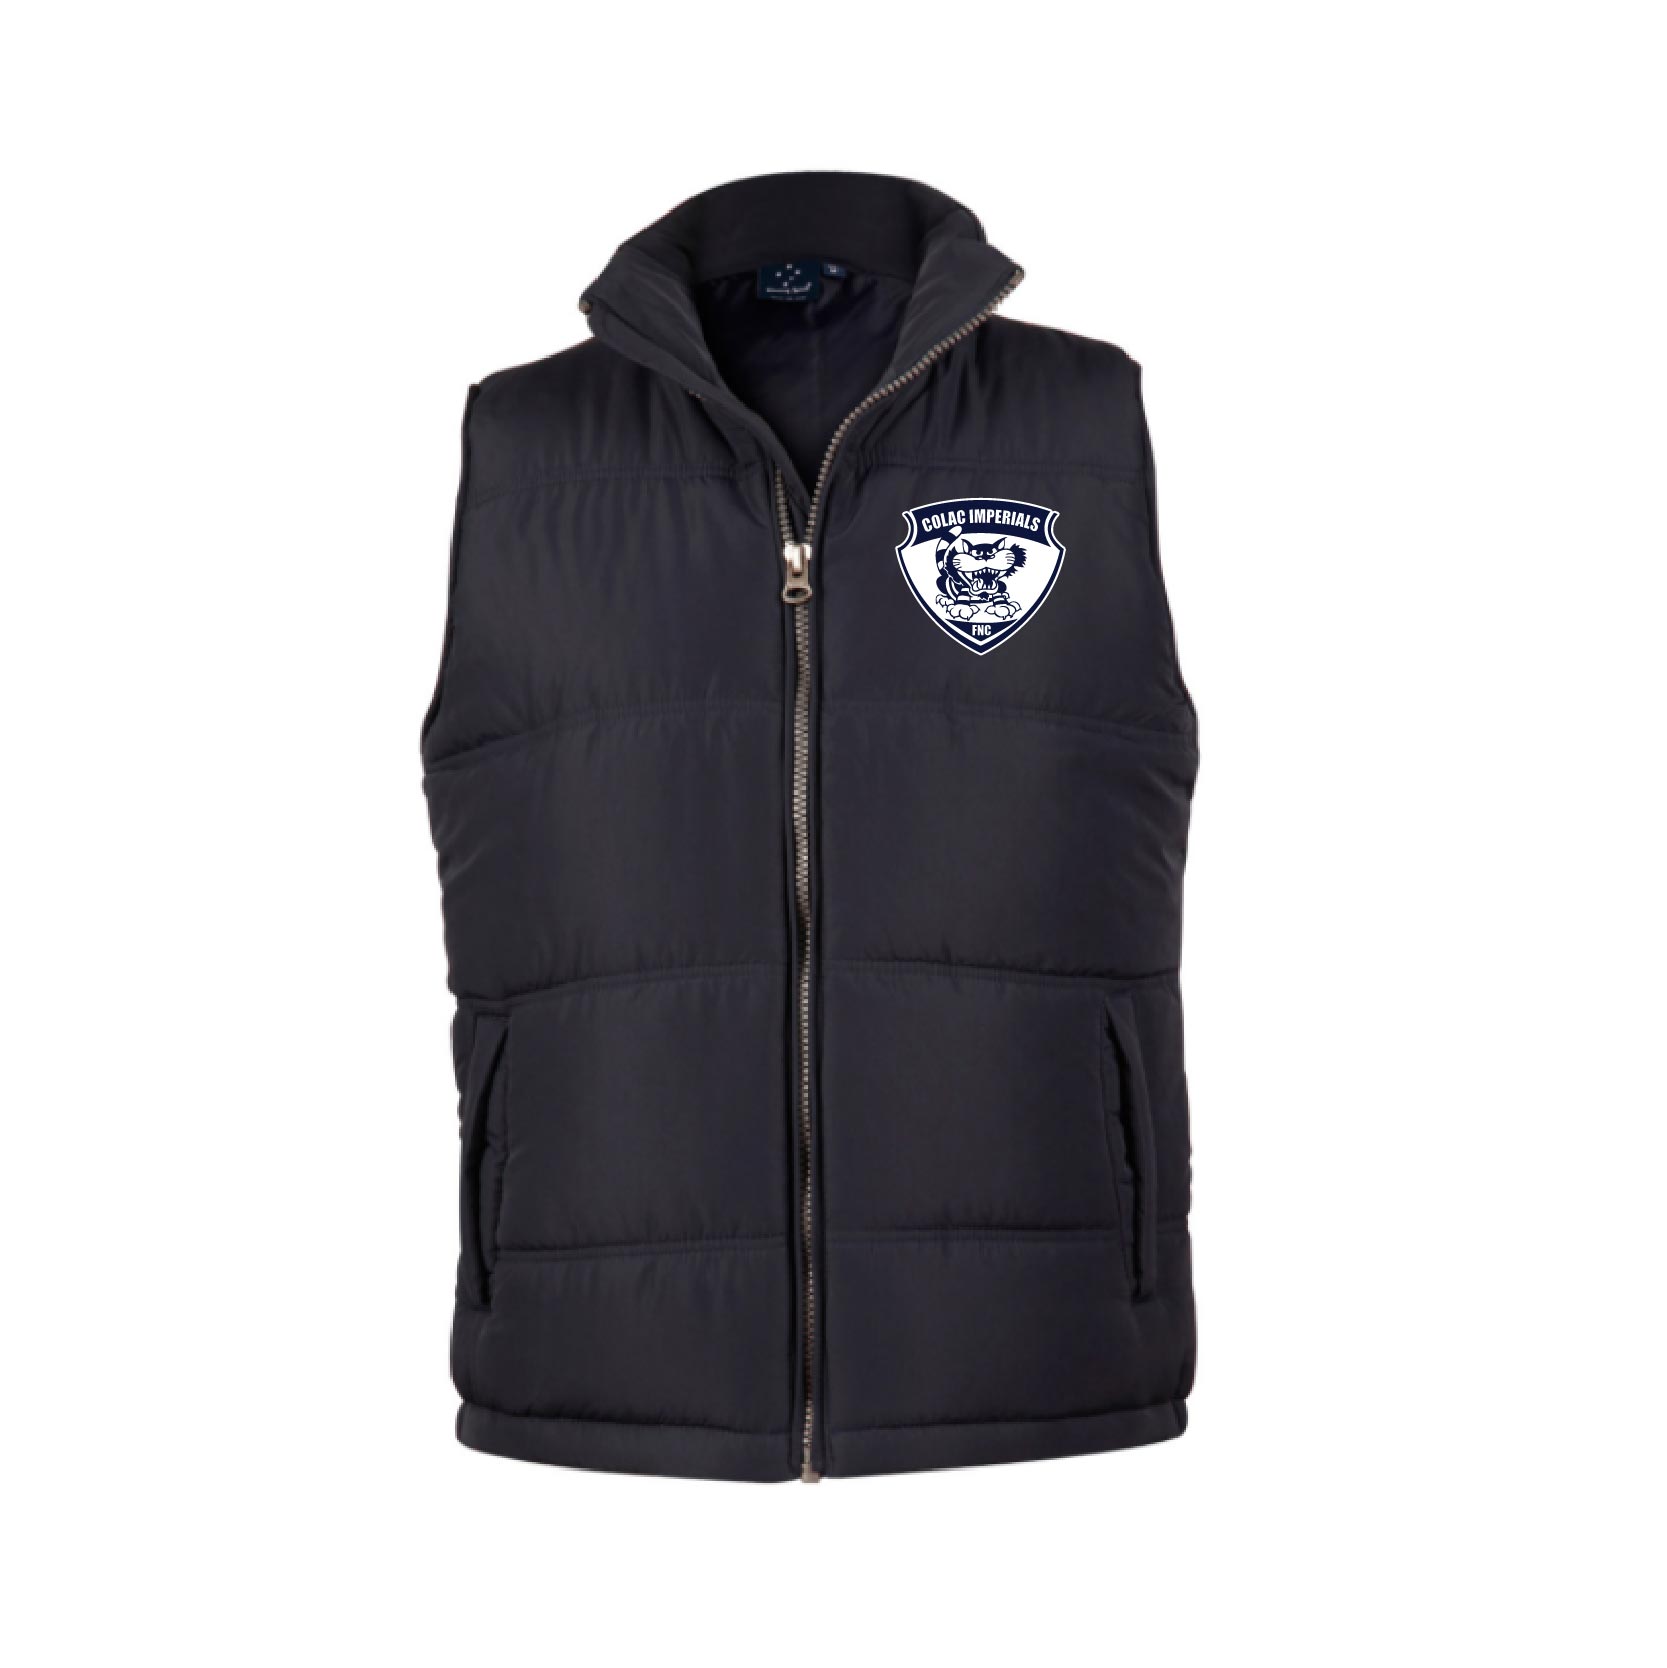 Colac Imperials Vest – Colac Imperials Football Netball Club